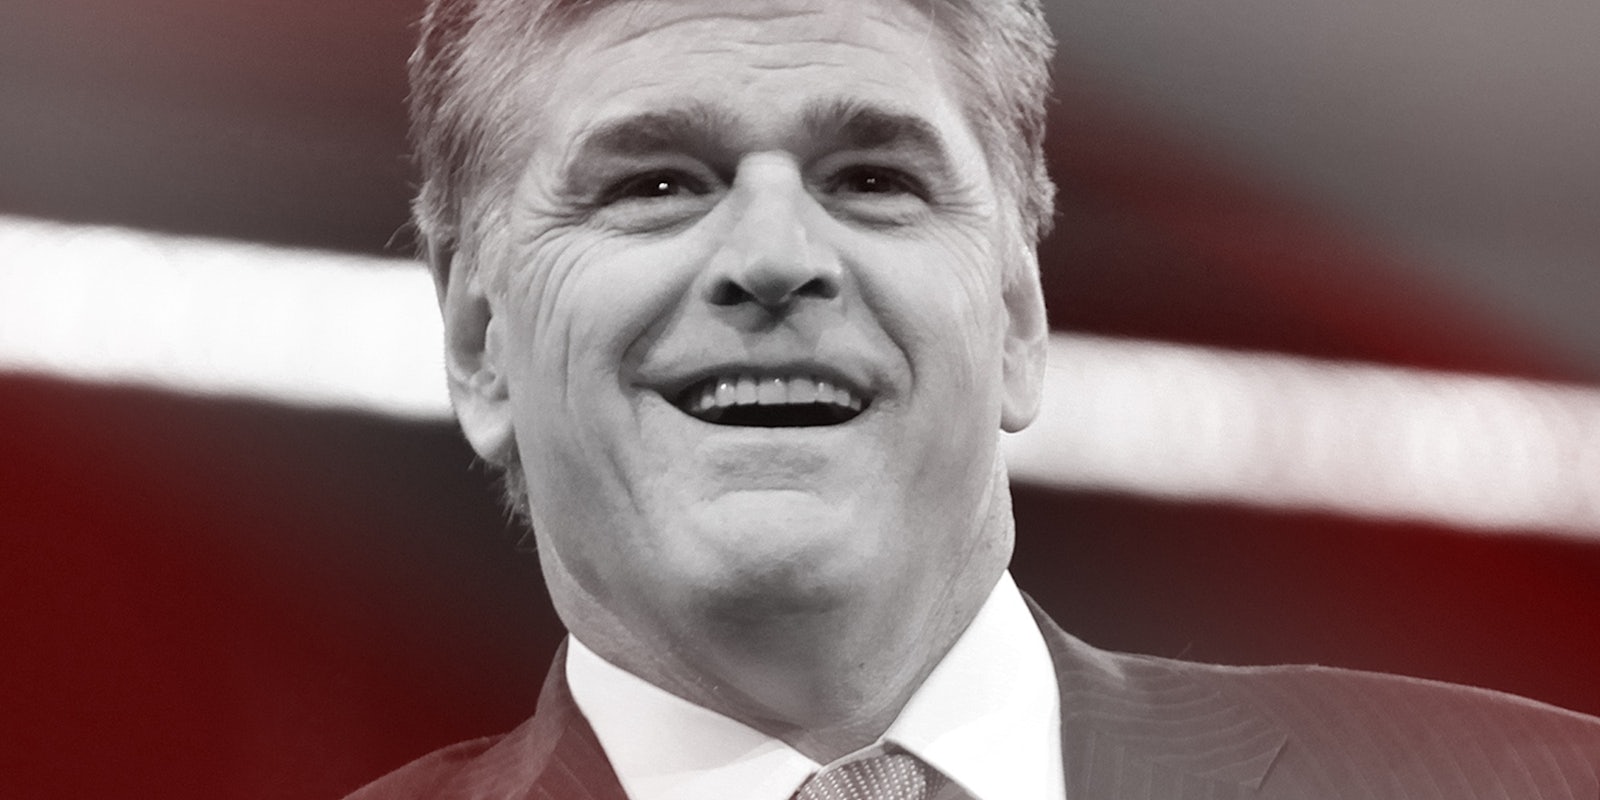 Sean Hannity sexual harassment allegations